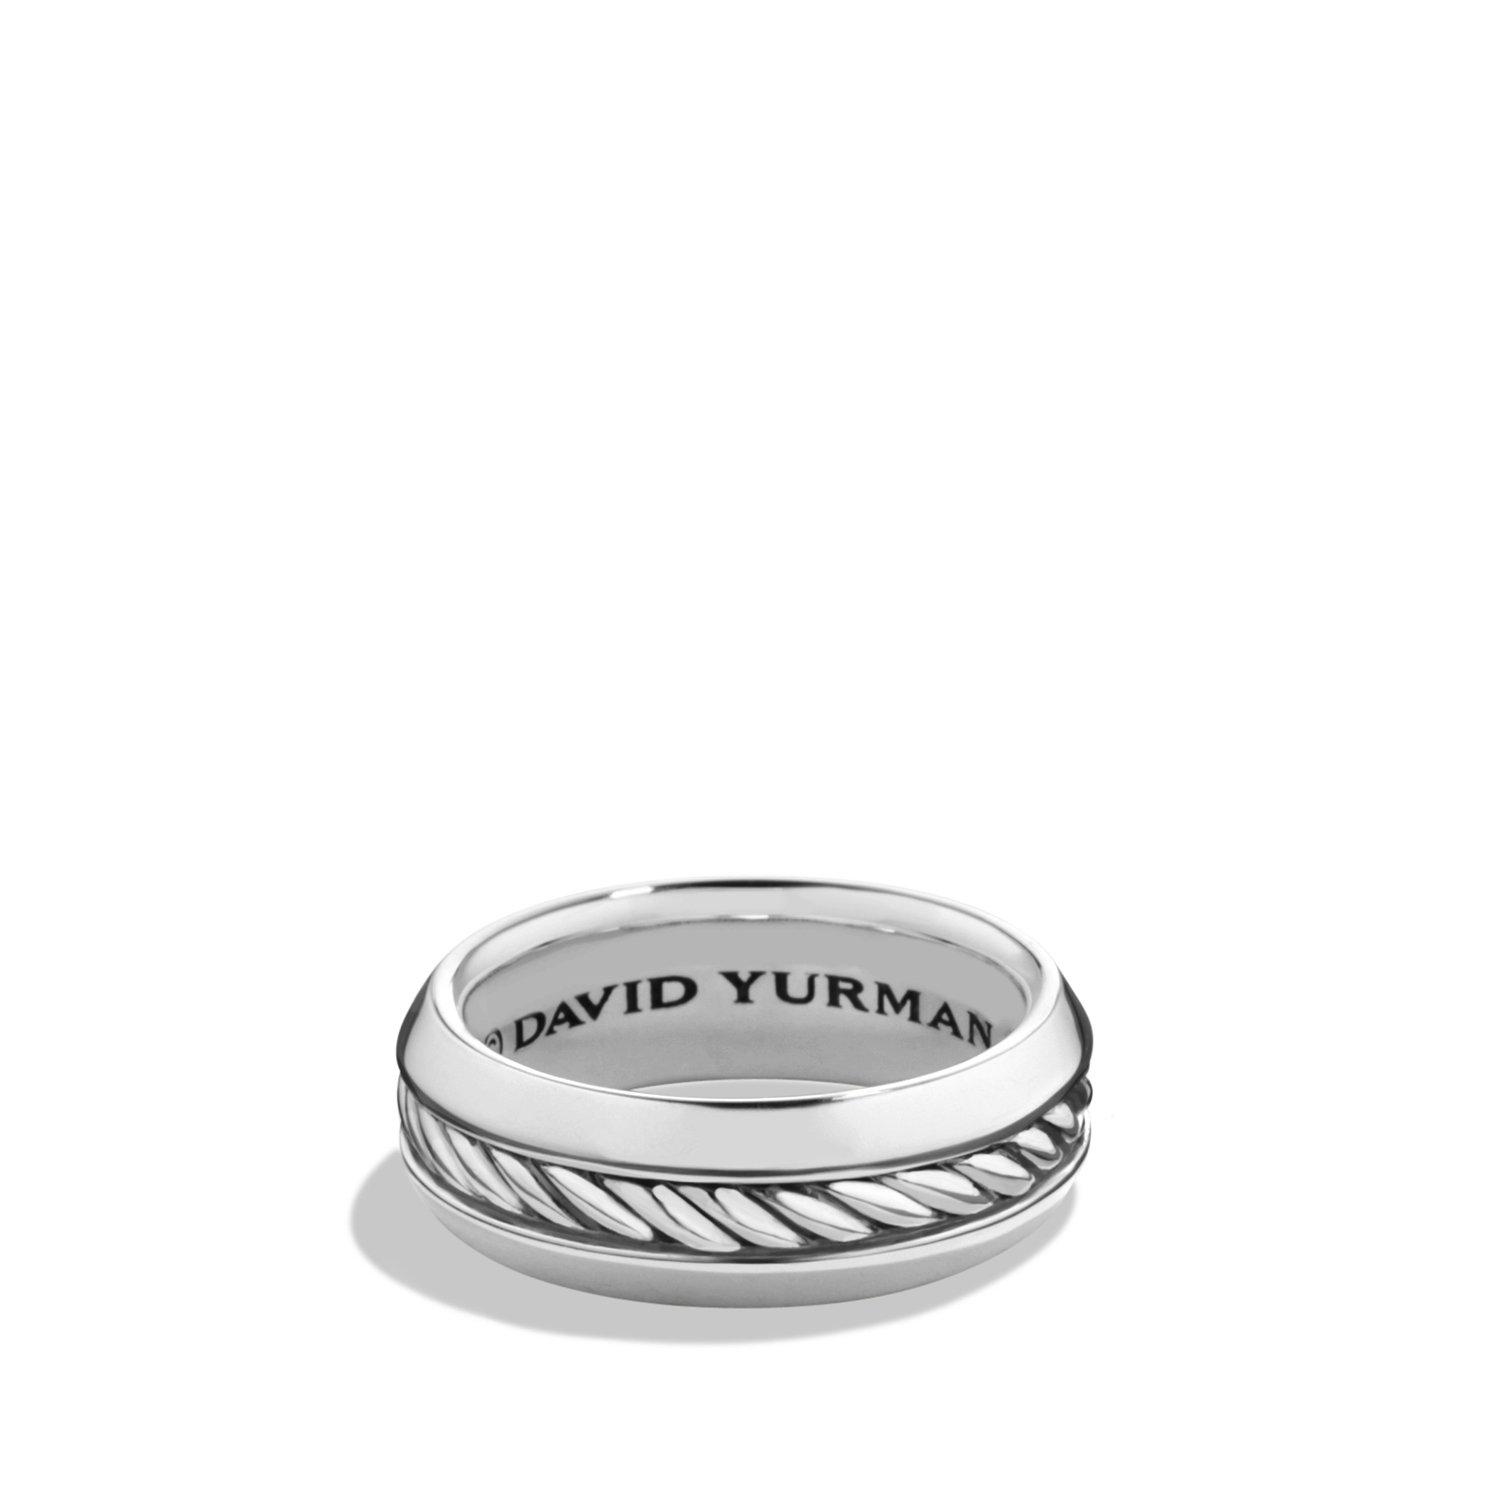 David Yurman Men's Cable Inset Classic Band Ring in Sterling Silver, size 10